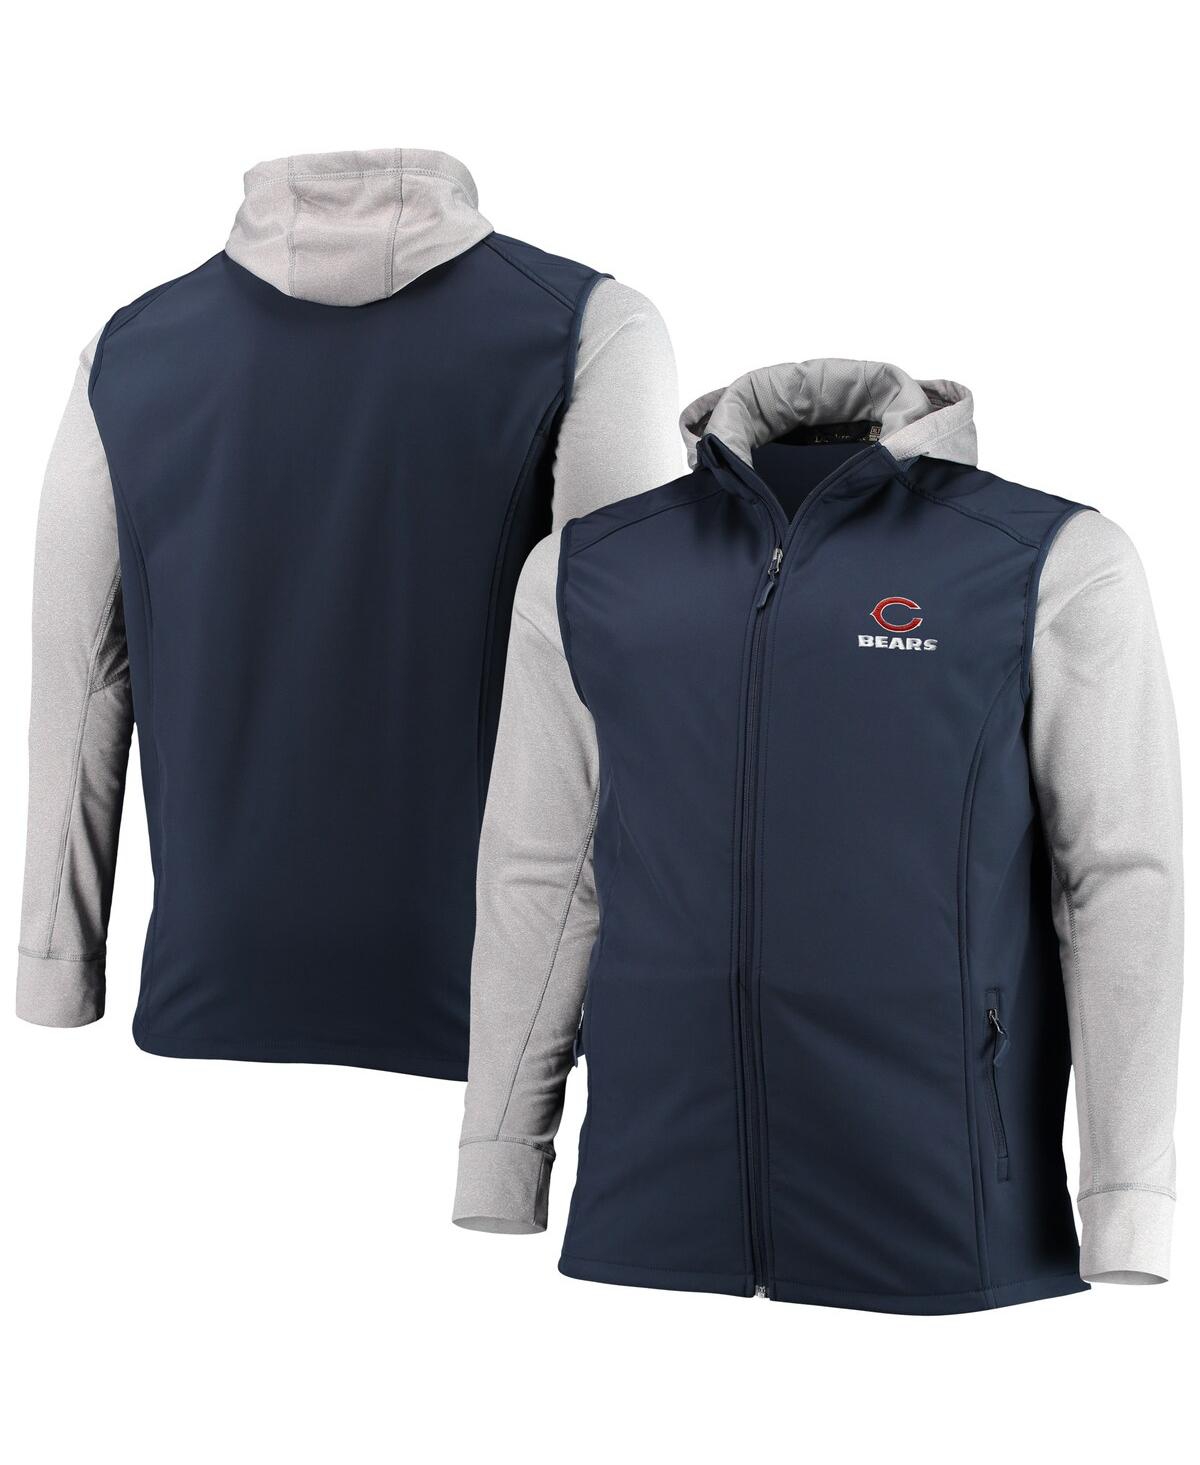 Men's Dunbrooke Navy and Gray Chicago Bears Big and Tall Alpha Full-Zip Hoodie Jacket - Navy, Gray